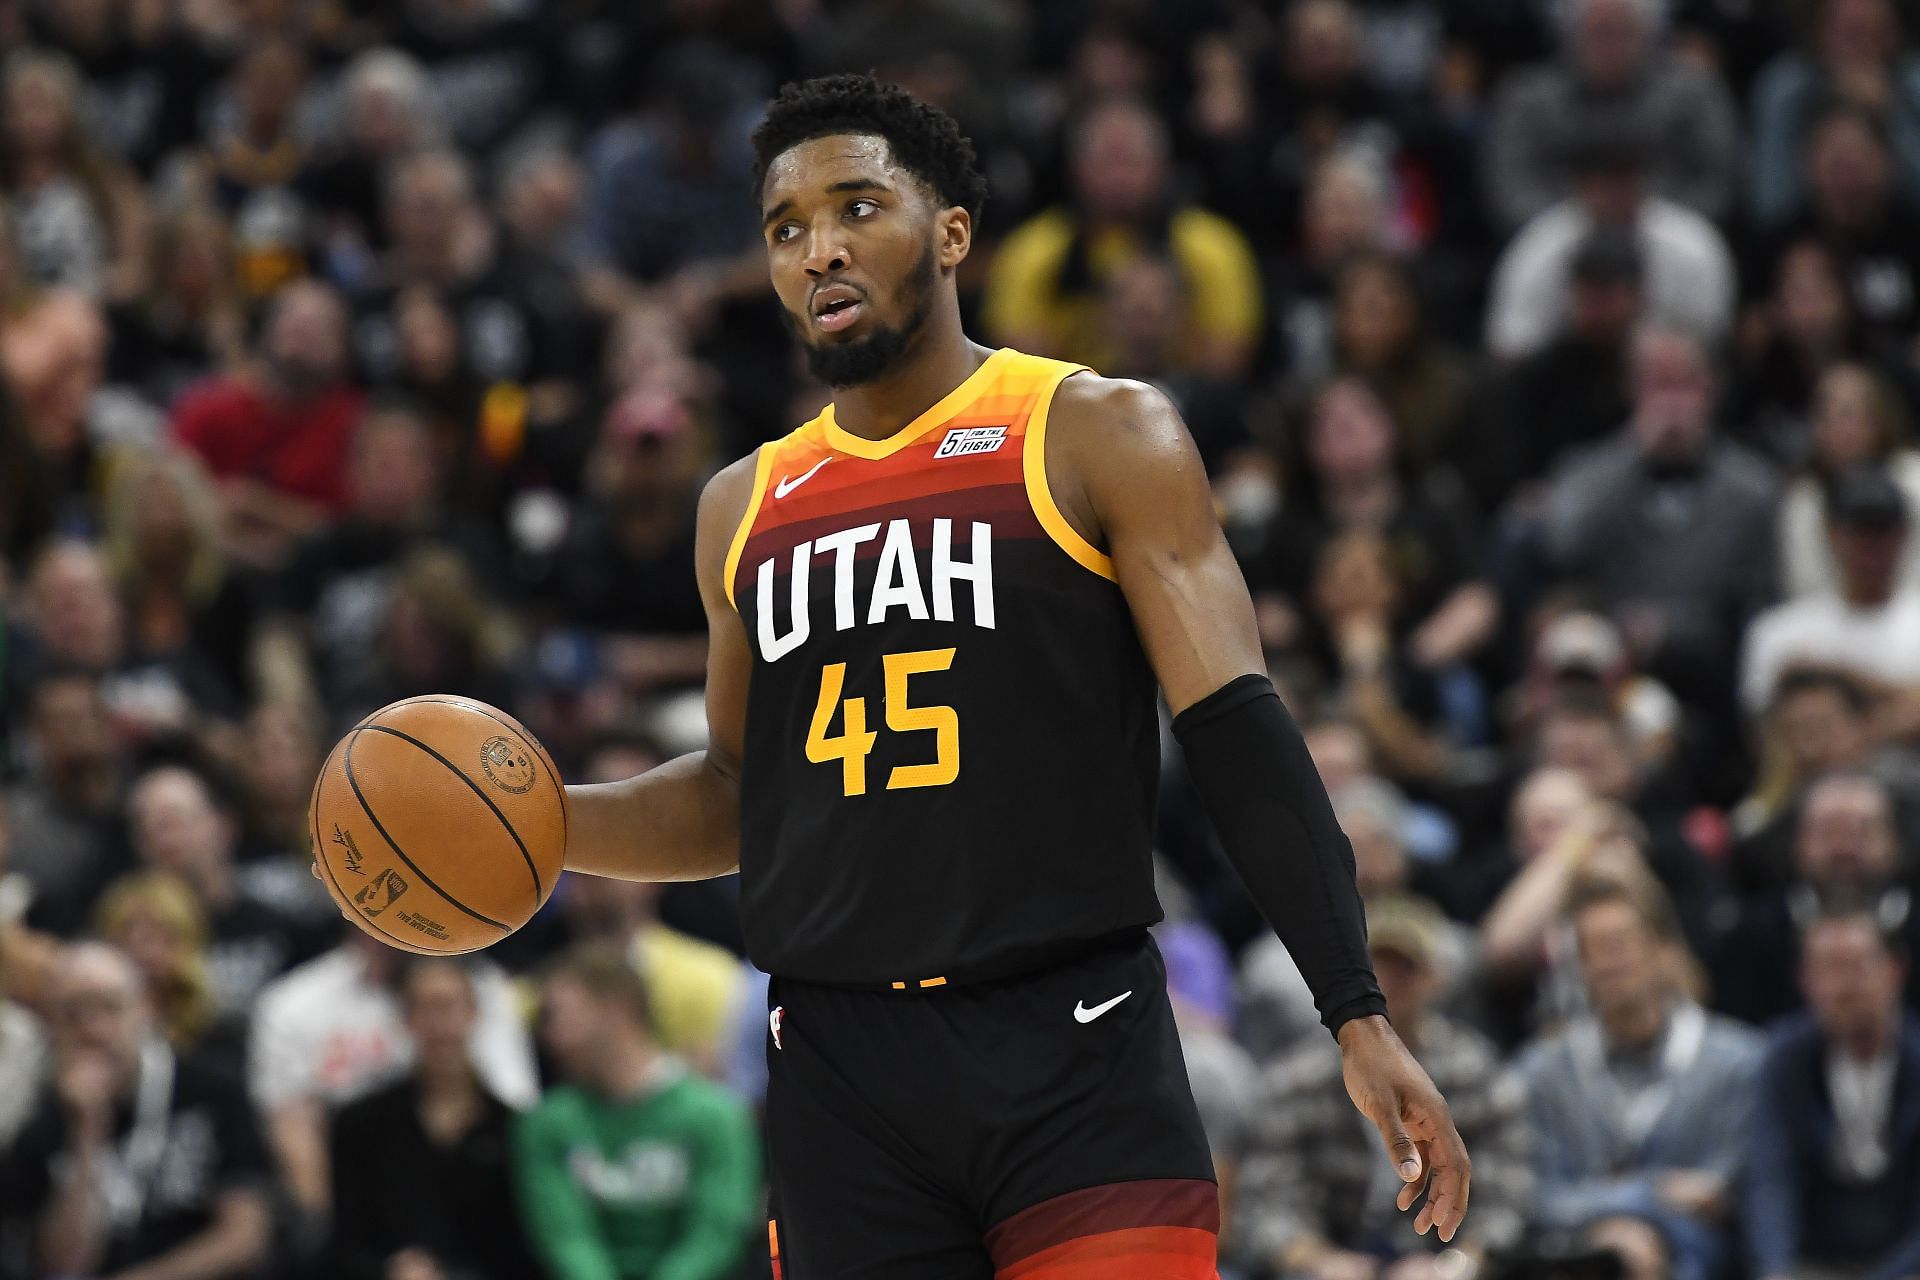 Donovan Mitchell could depart the Utah Jazz and join the New York Knicks this summer